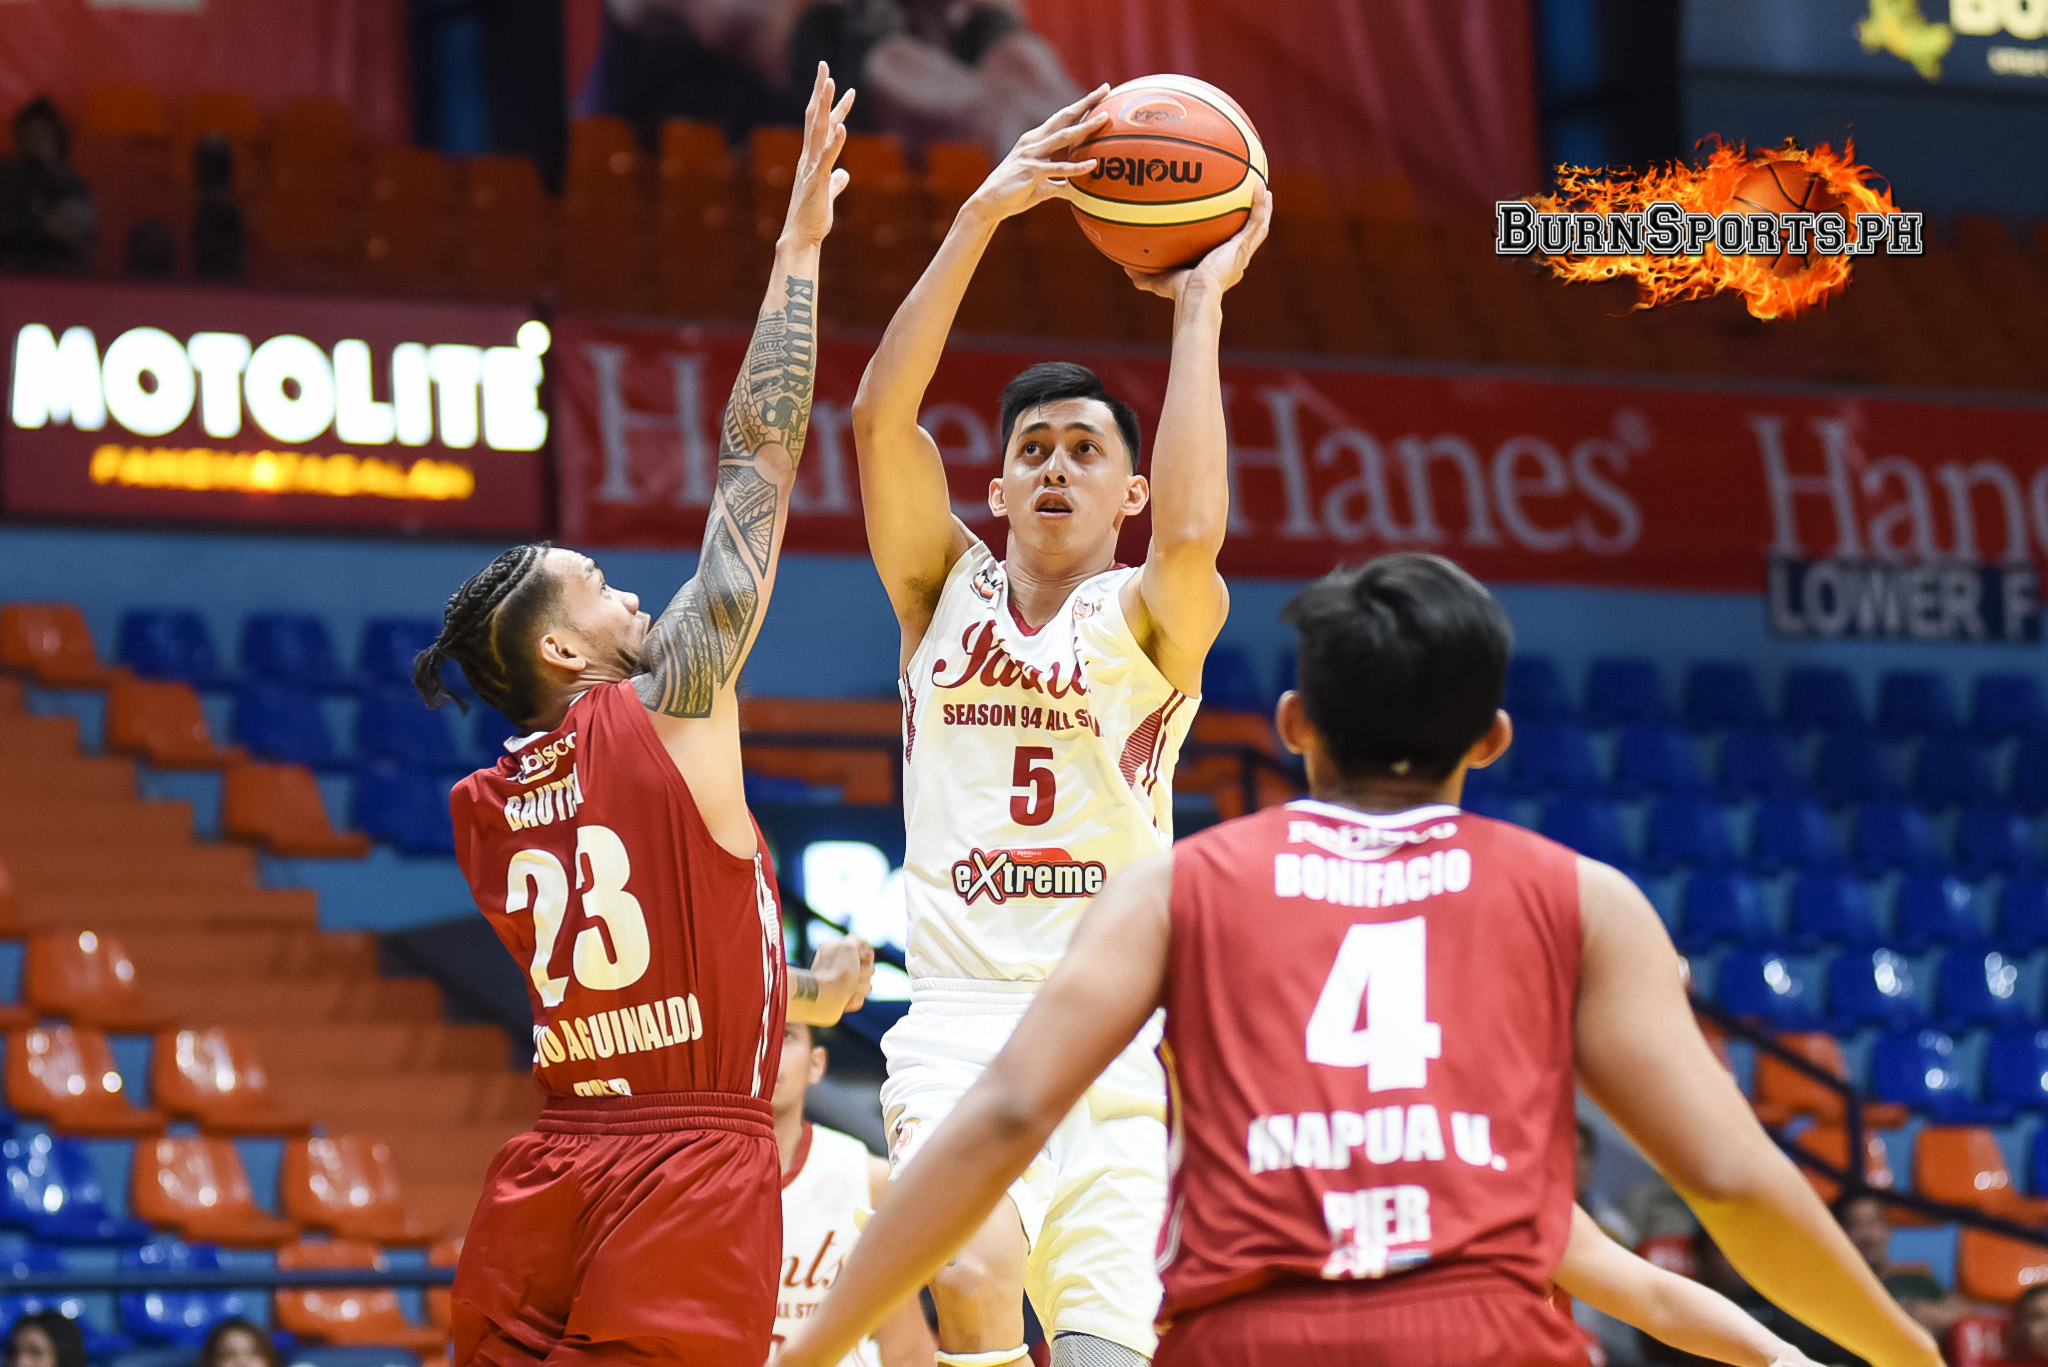 Team Saints edges Heroes anew in NCAA All-Star Game